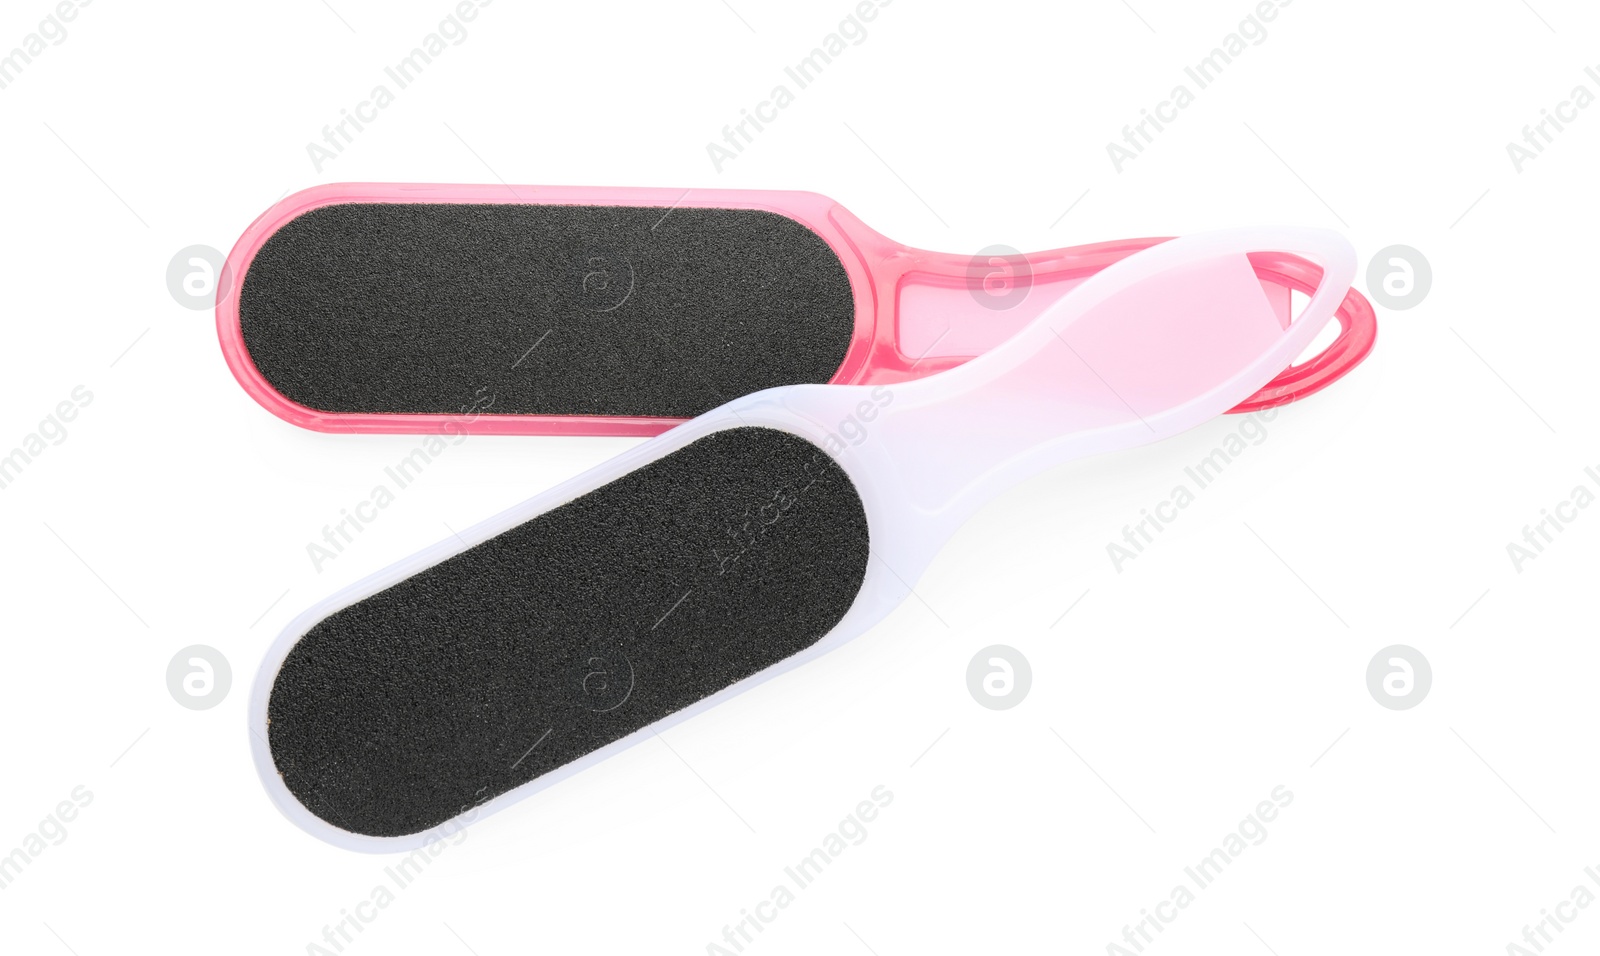 Photo of Foot files on white background, top view. Pedicure tools